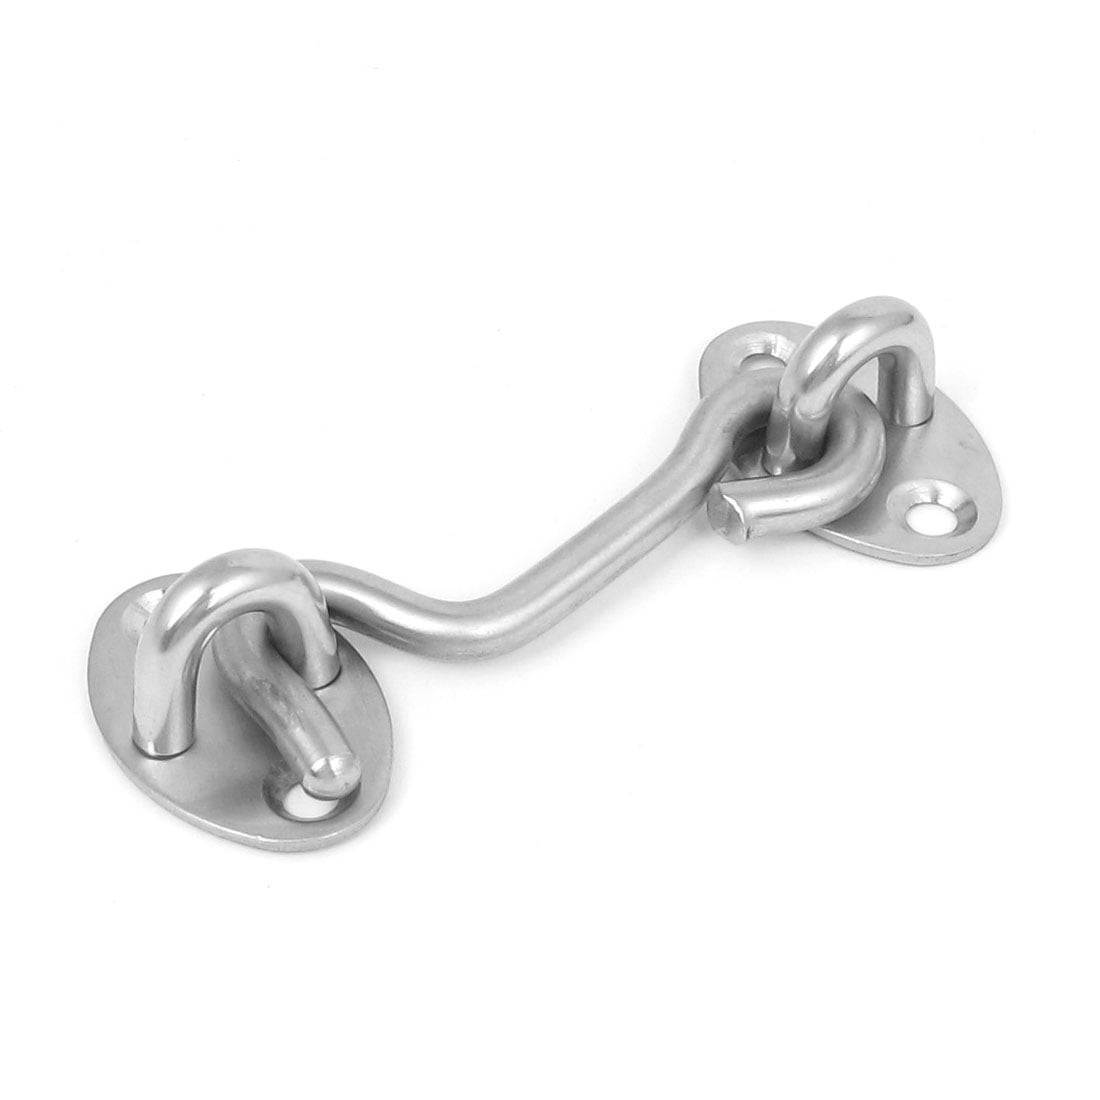 Unique Bargains Stainless Steel Cabin Door Eye Latch Bolt 3 Window Hook  with Screw Silver Tone 